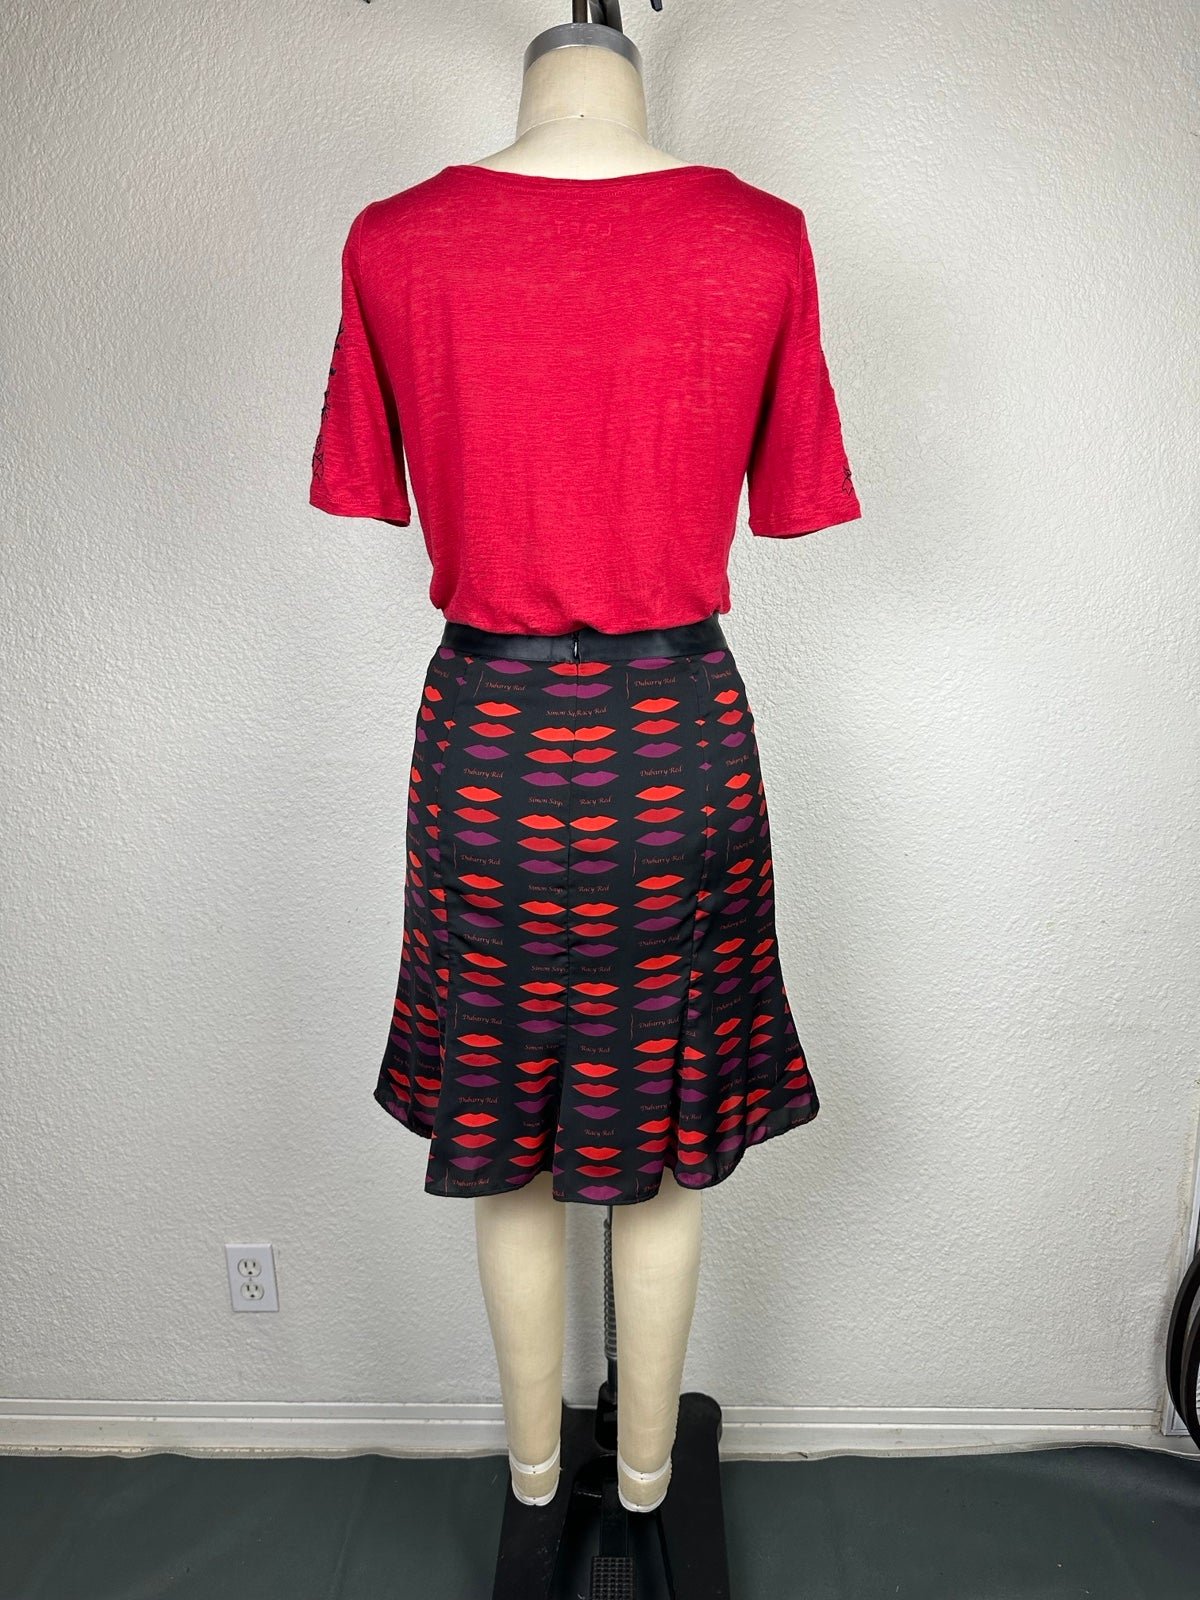 Classic Banana Republic Skirt Size 10 Black/Red Silky Fited/Flow hnq1jqQKH for sale